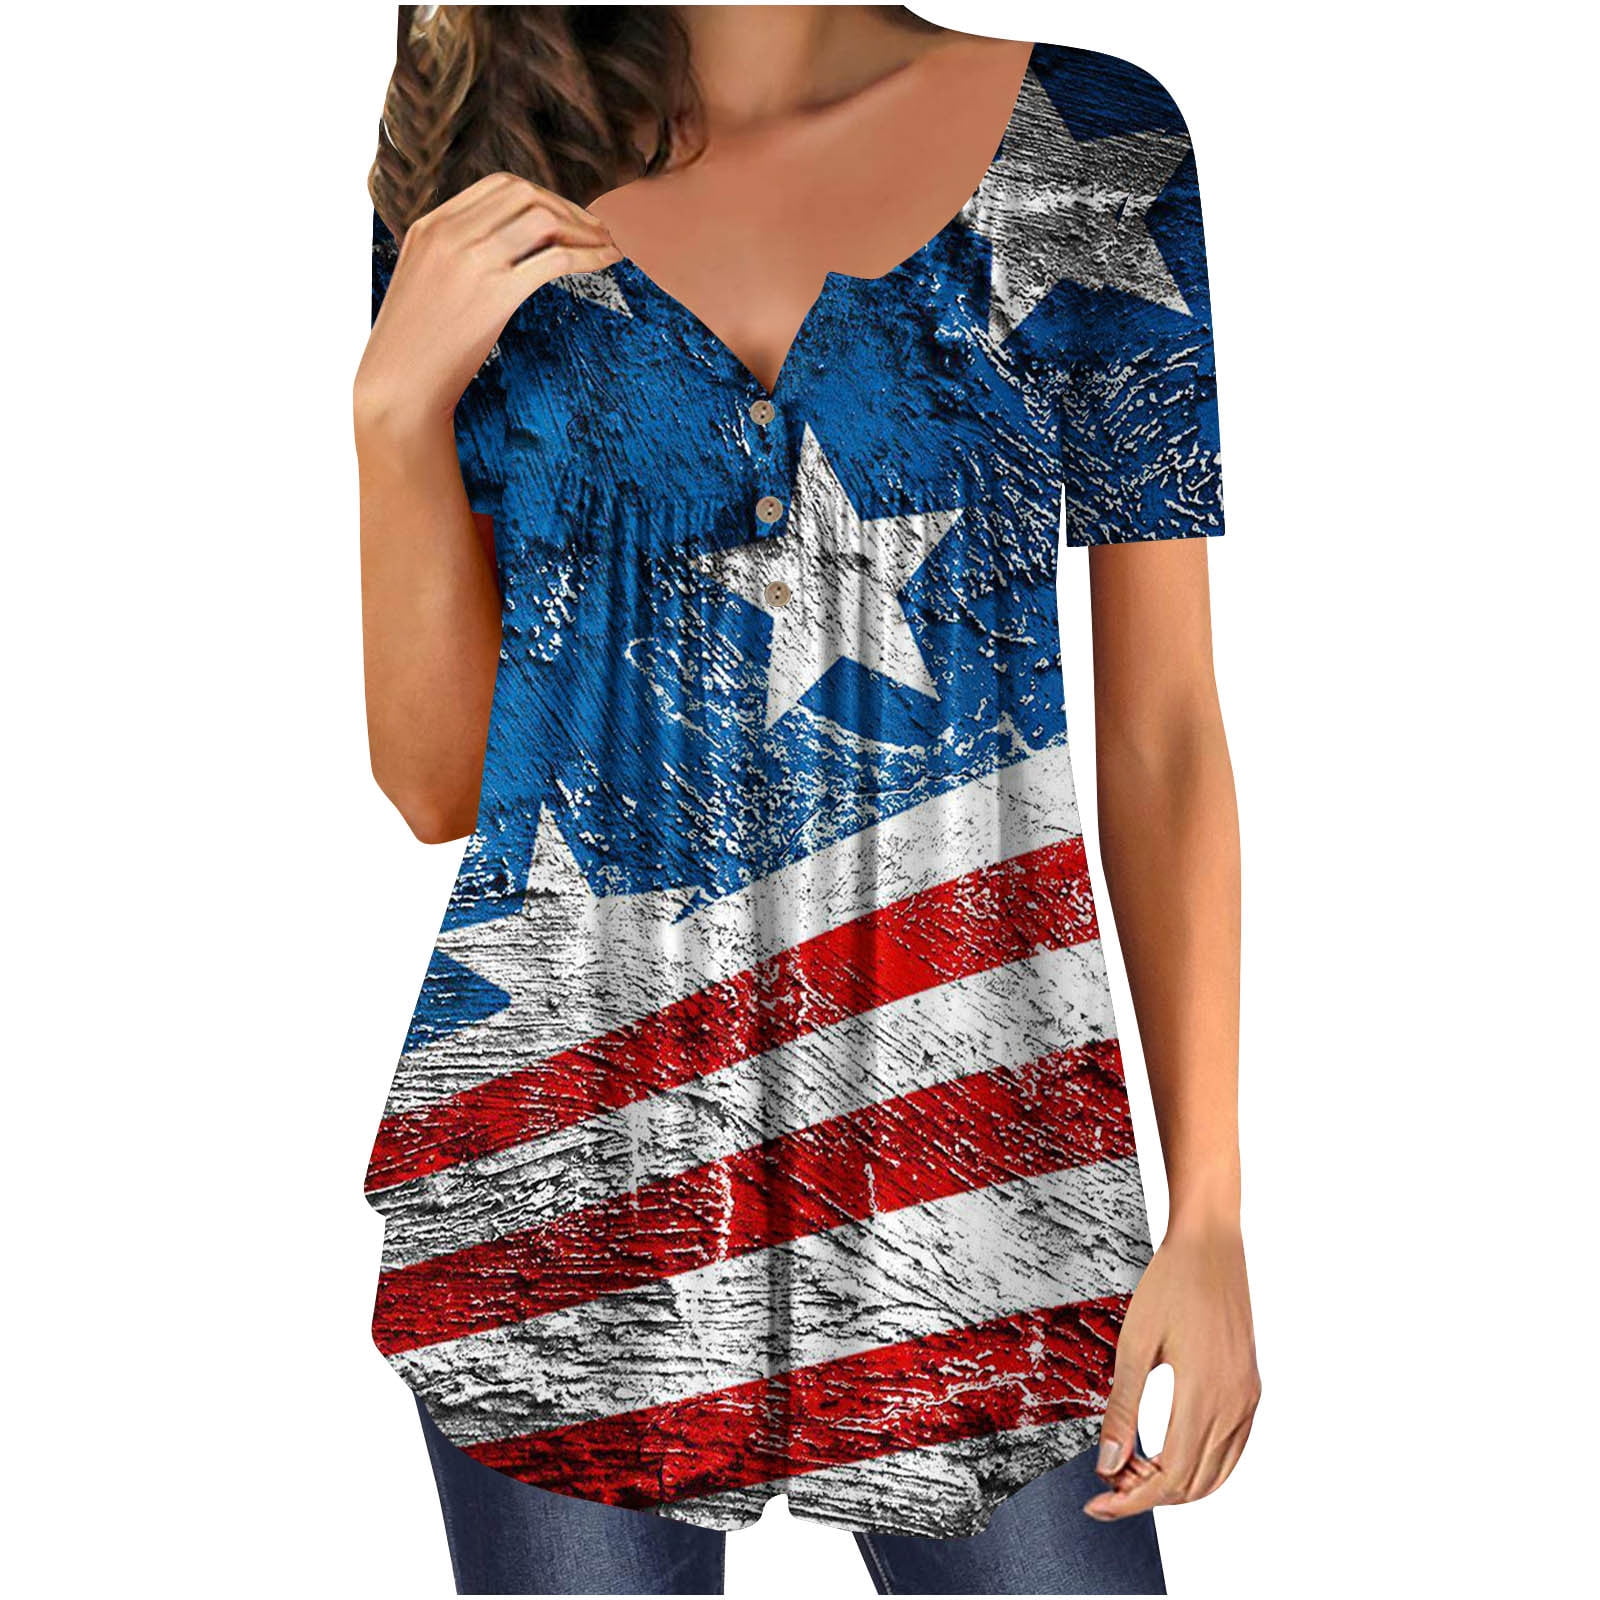 ZQGJB Womens Patriotic Shirts Casual Summer Short Sleeve Button Neckline  Pleated Tee Shirts Trendy USA Flag Print July 4th Holiday Gift Top Loose